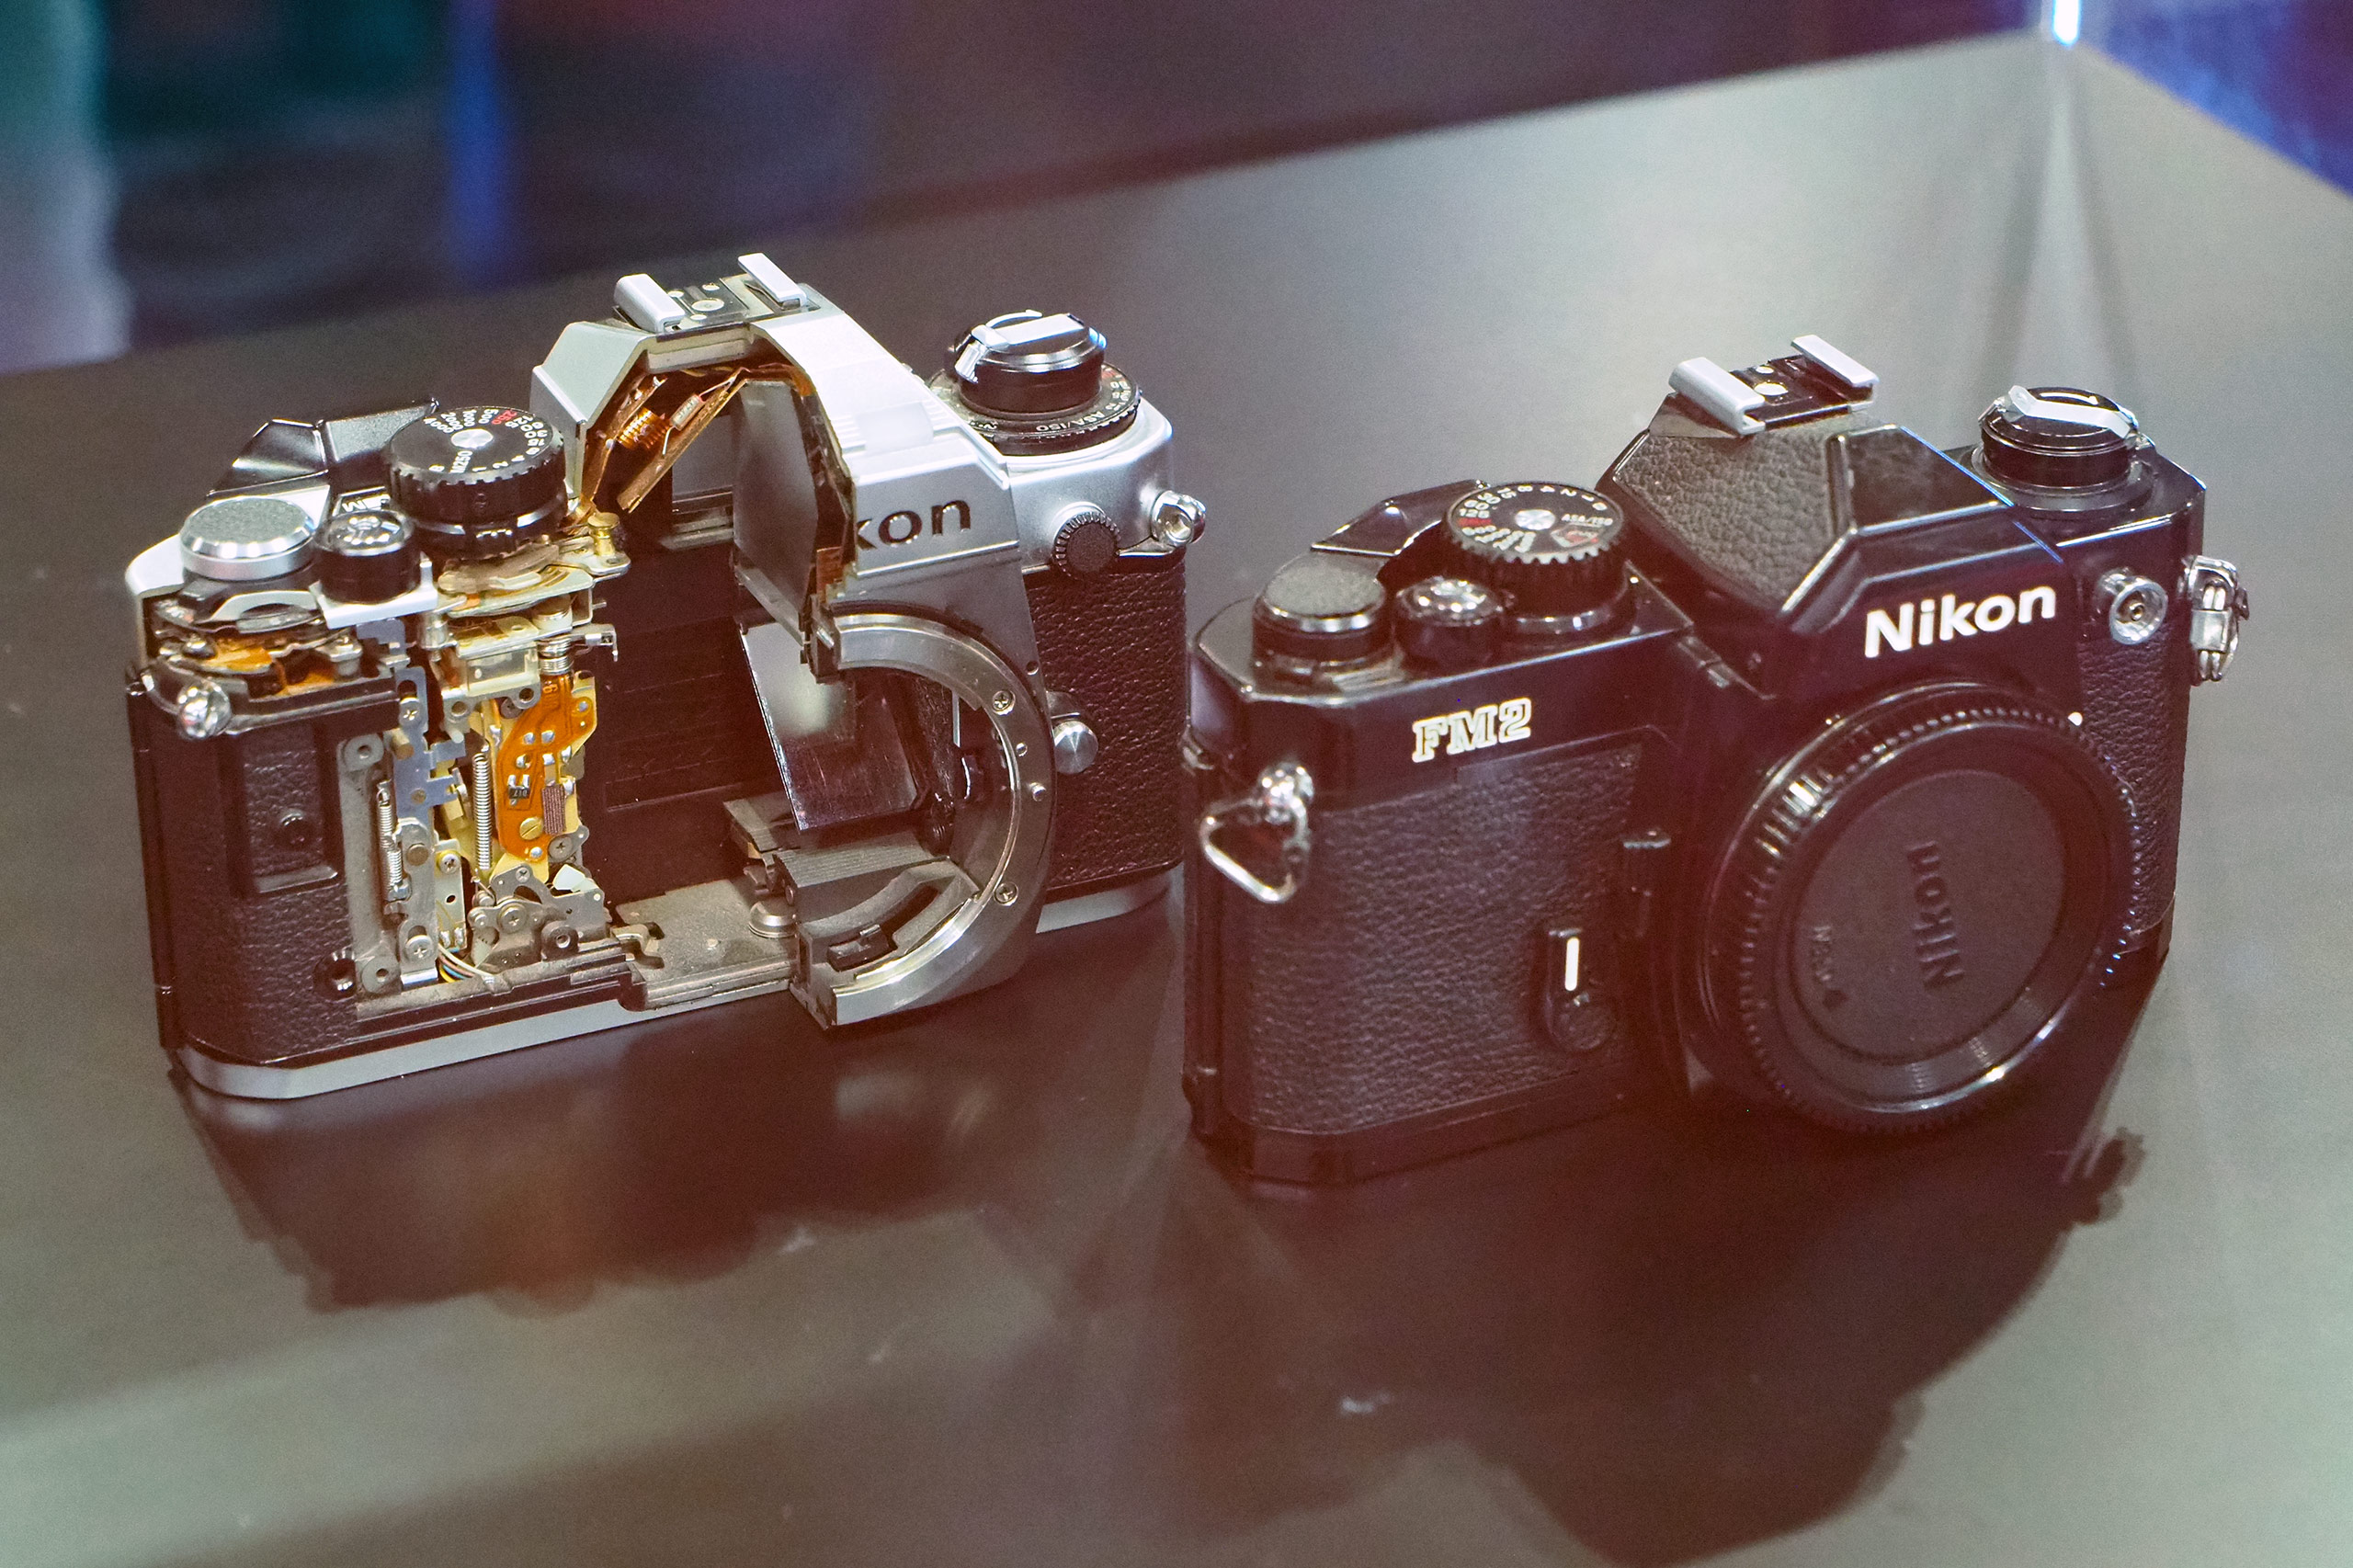 The Nikon FM2 cut open so you can see what's inside this classic 35mm film SLR